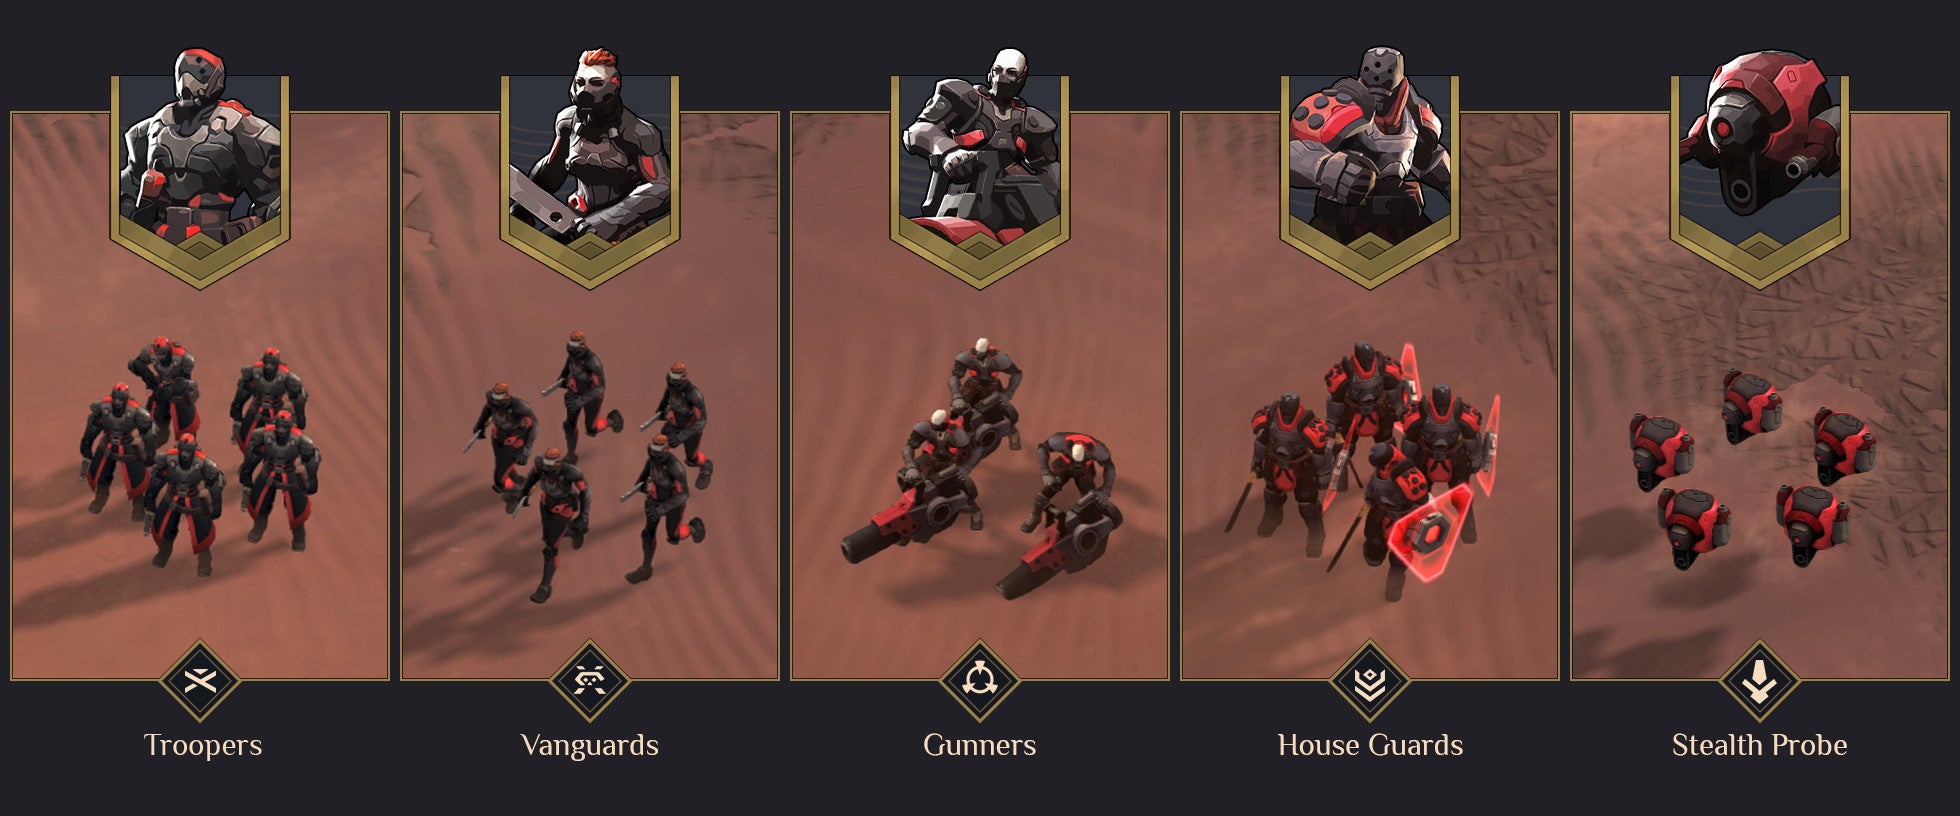 The different Harkonnen military units from Dune: Spice Wars